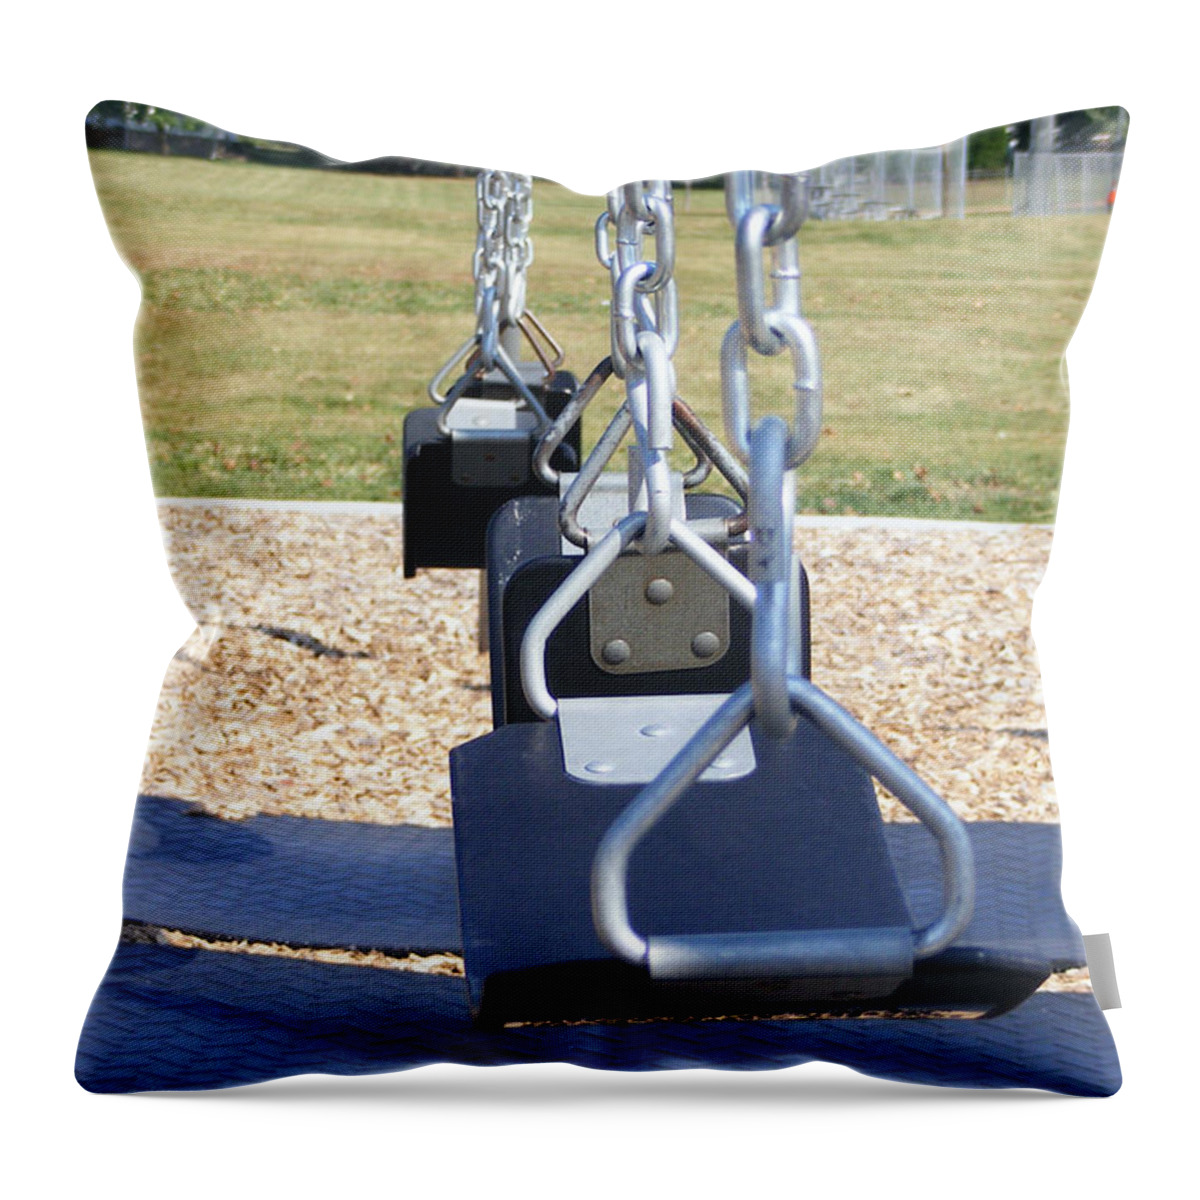 Black Throw Pillow featuring the photograph Swings by Michelle Hoffmann